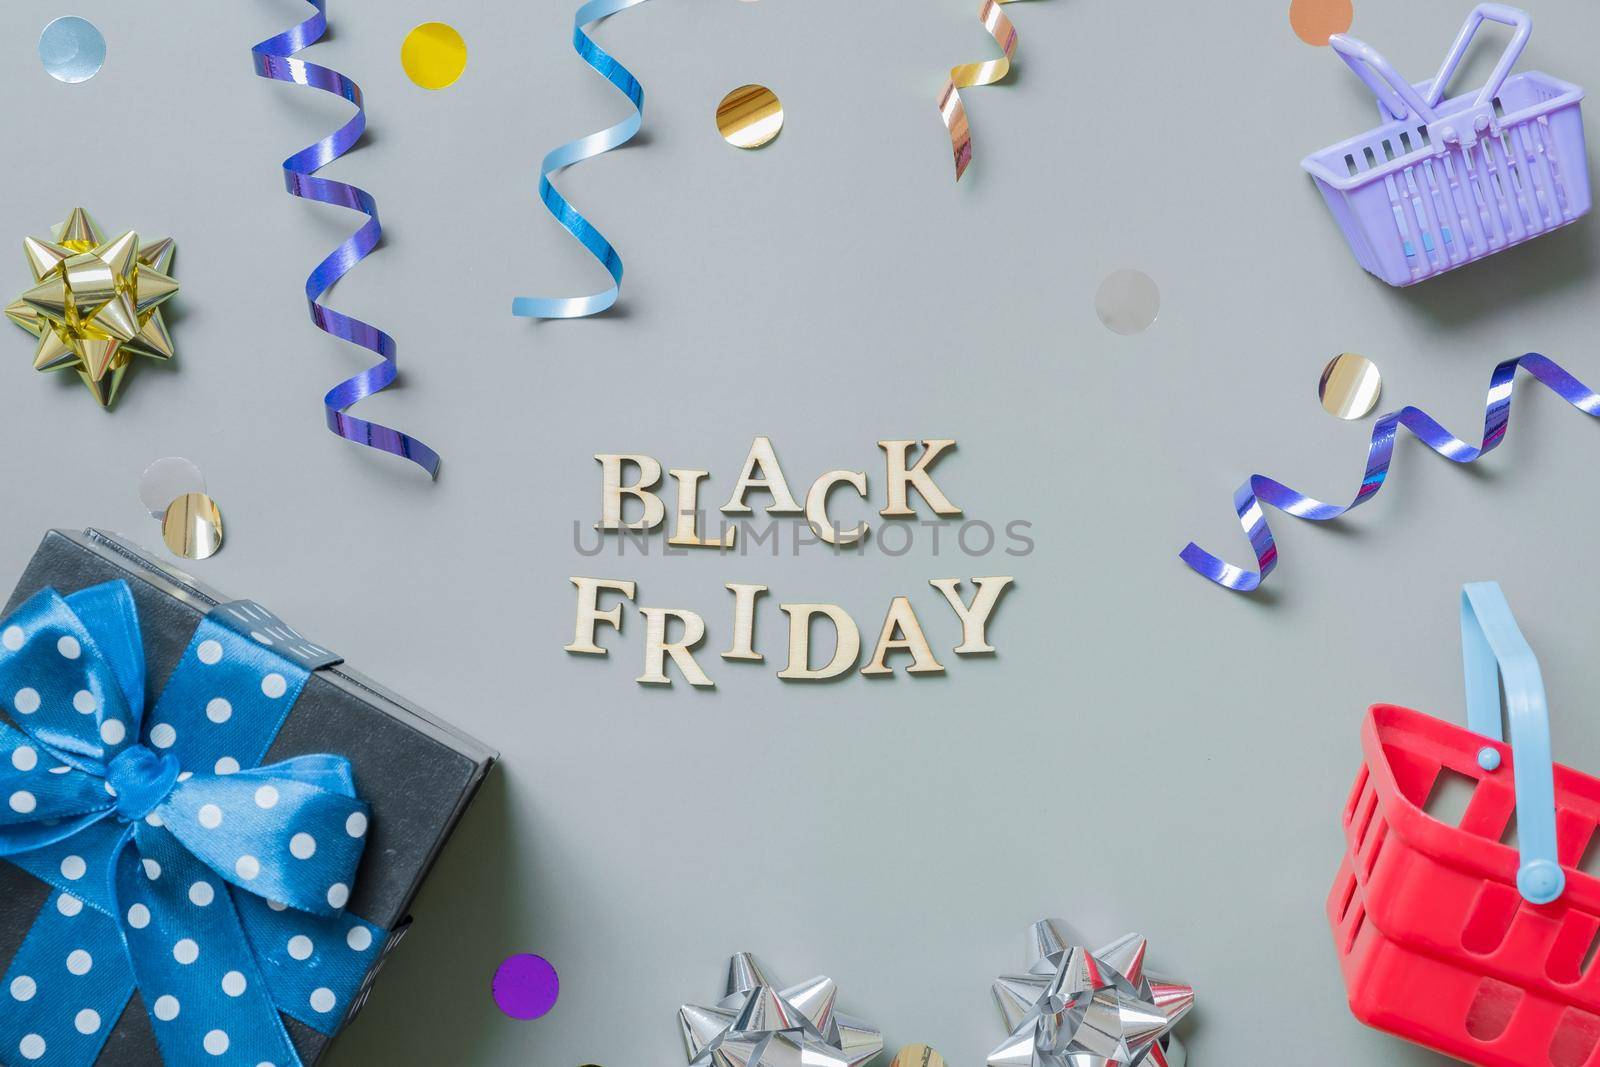 Black friday text with gifts, shopping baskets and festive tinsel flat lay.